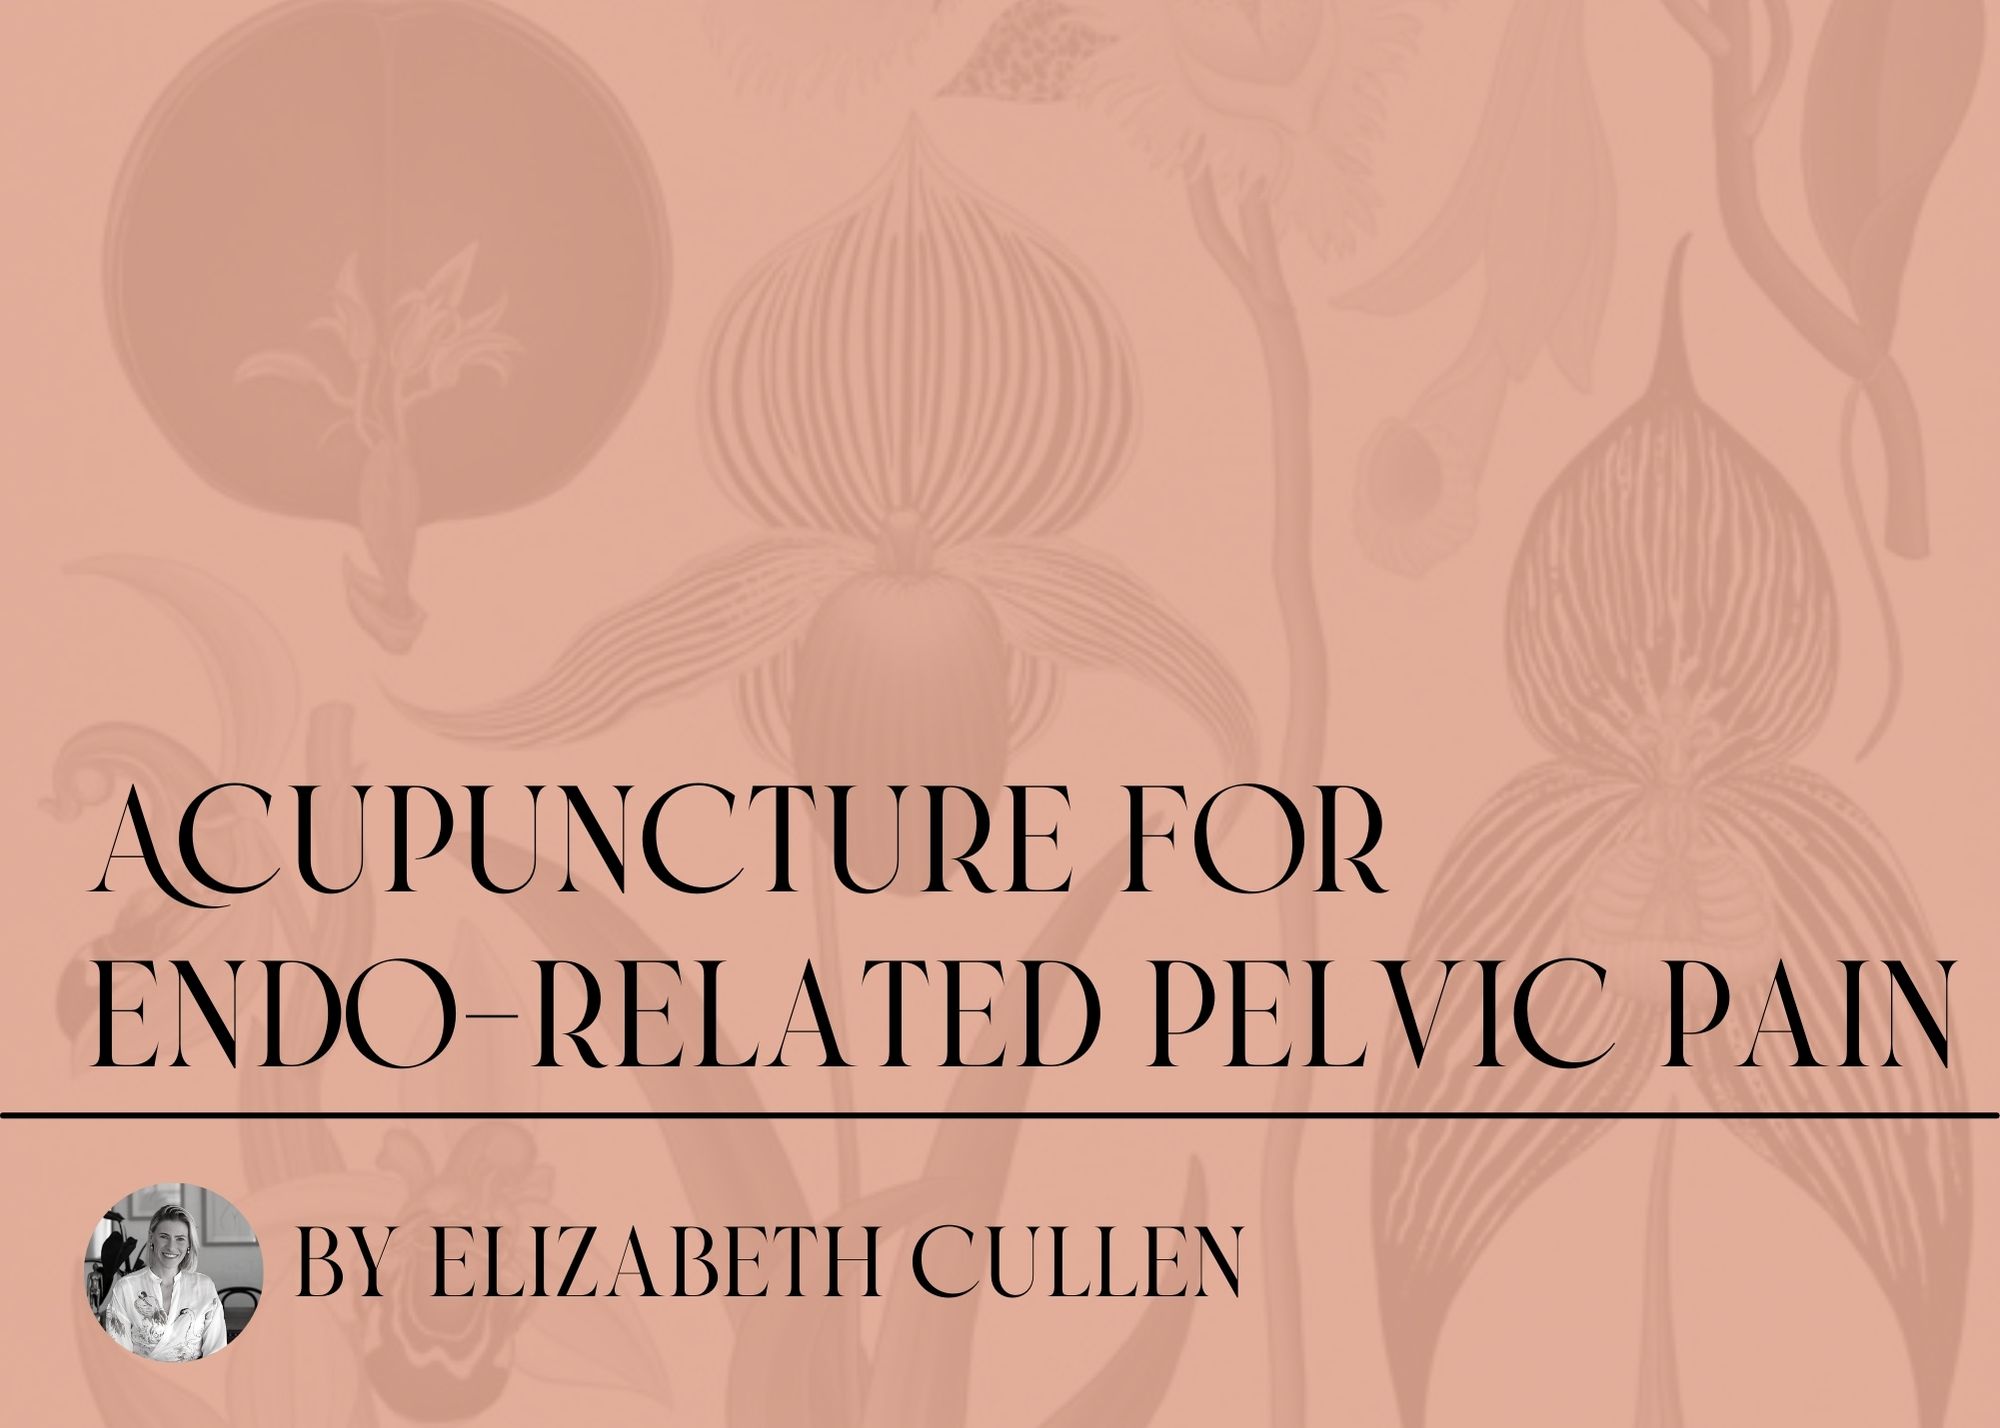 Acupuncture for Endometriosis - related Pelvic Pain